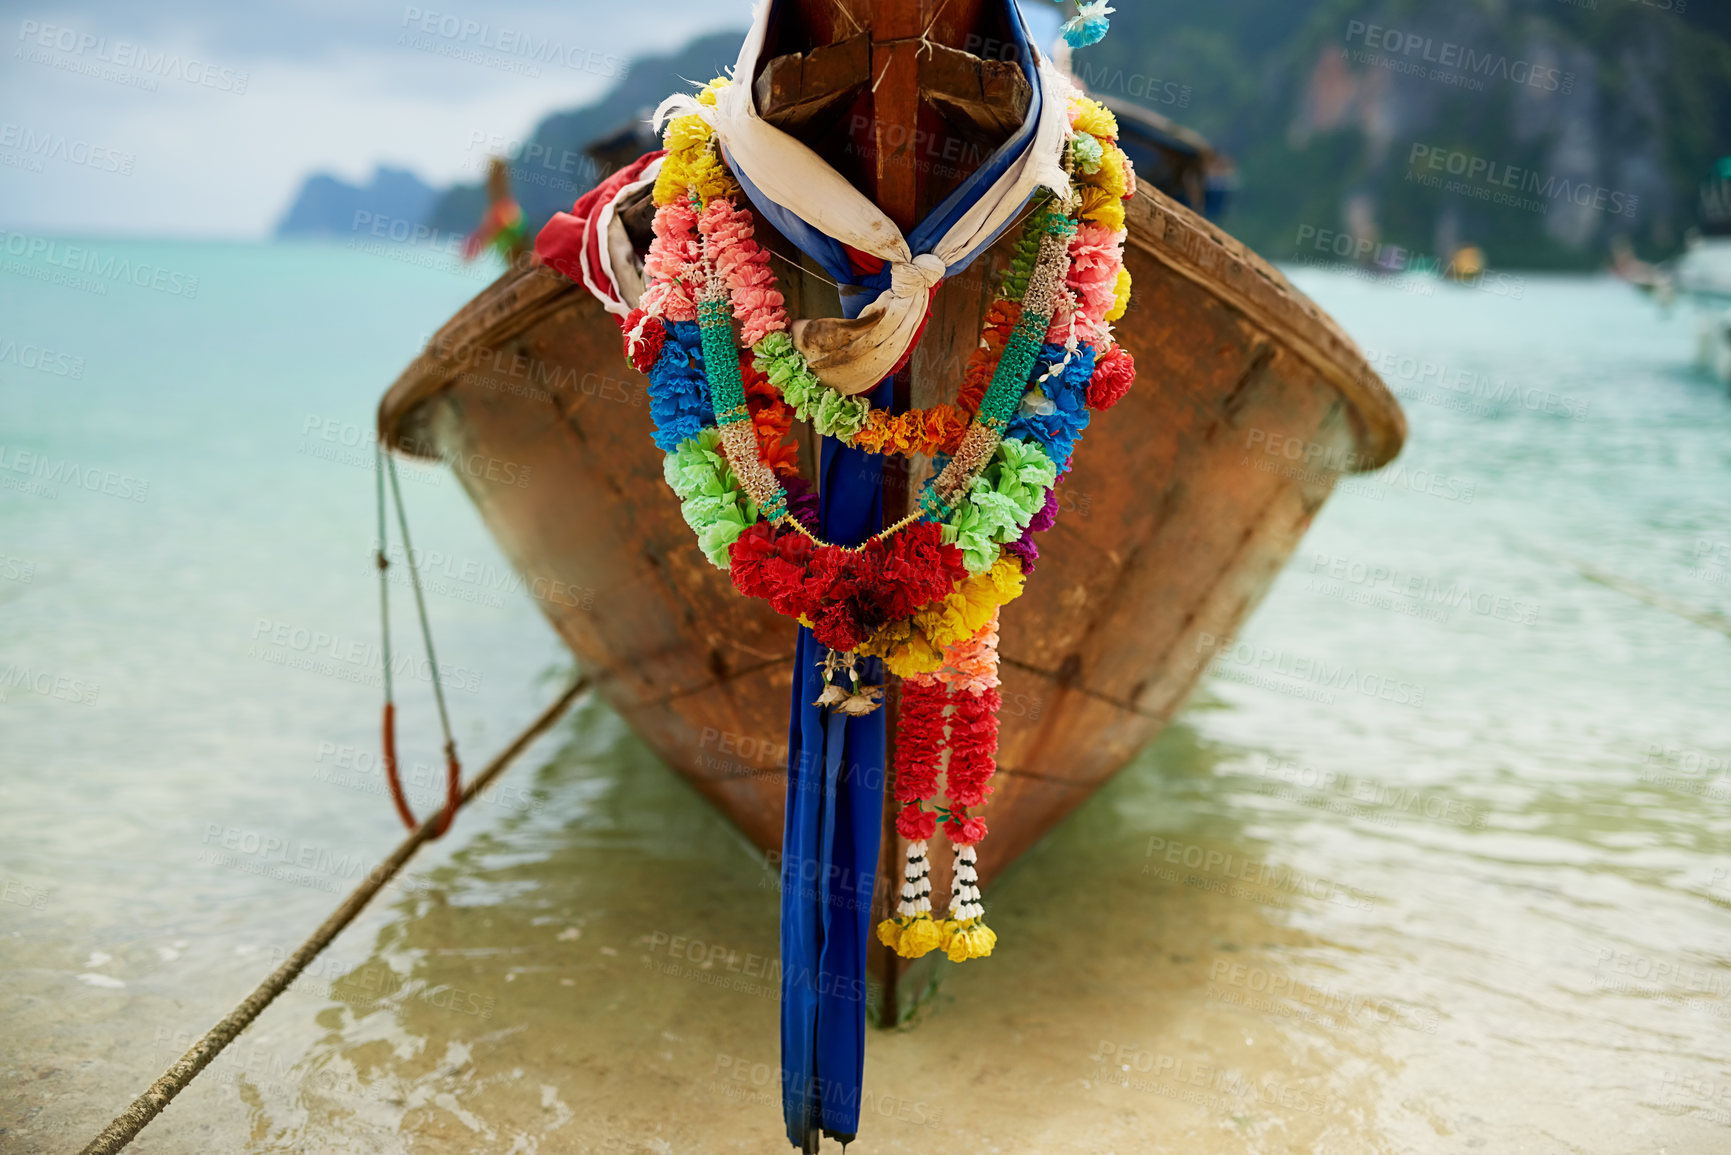 Buy stock photo Shot of a boat on the water with a colorful floral garland hanging from it